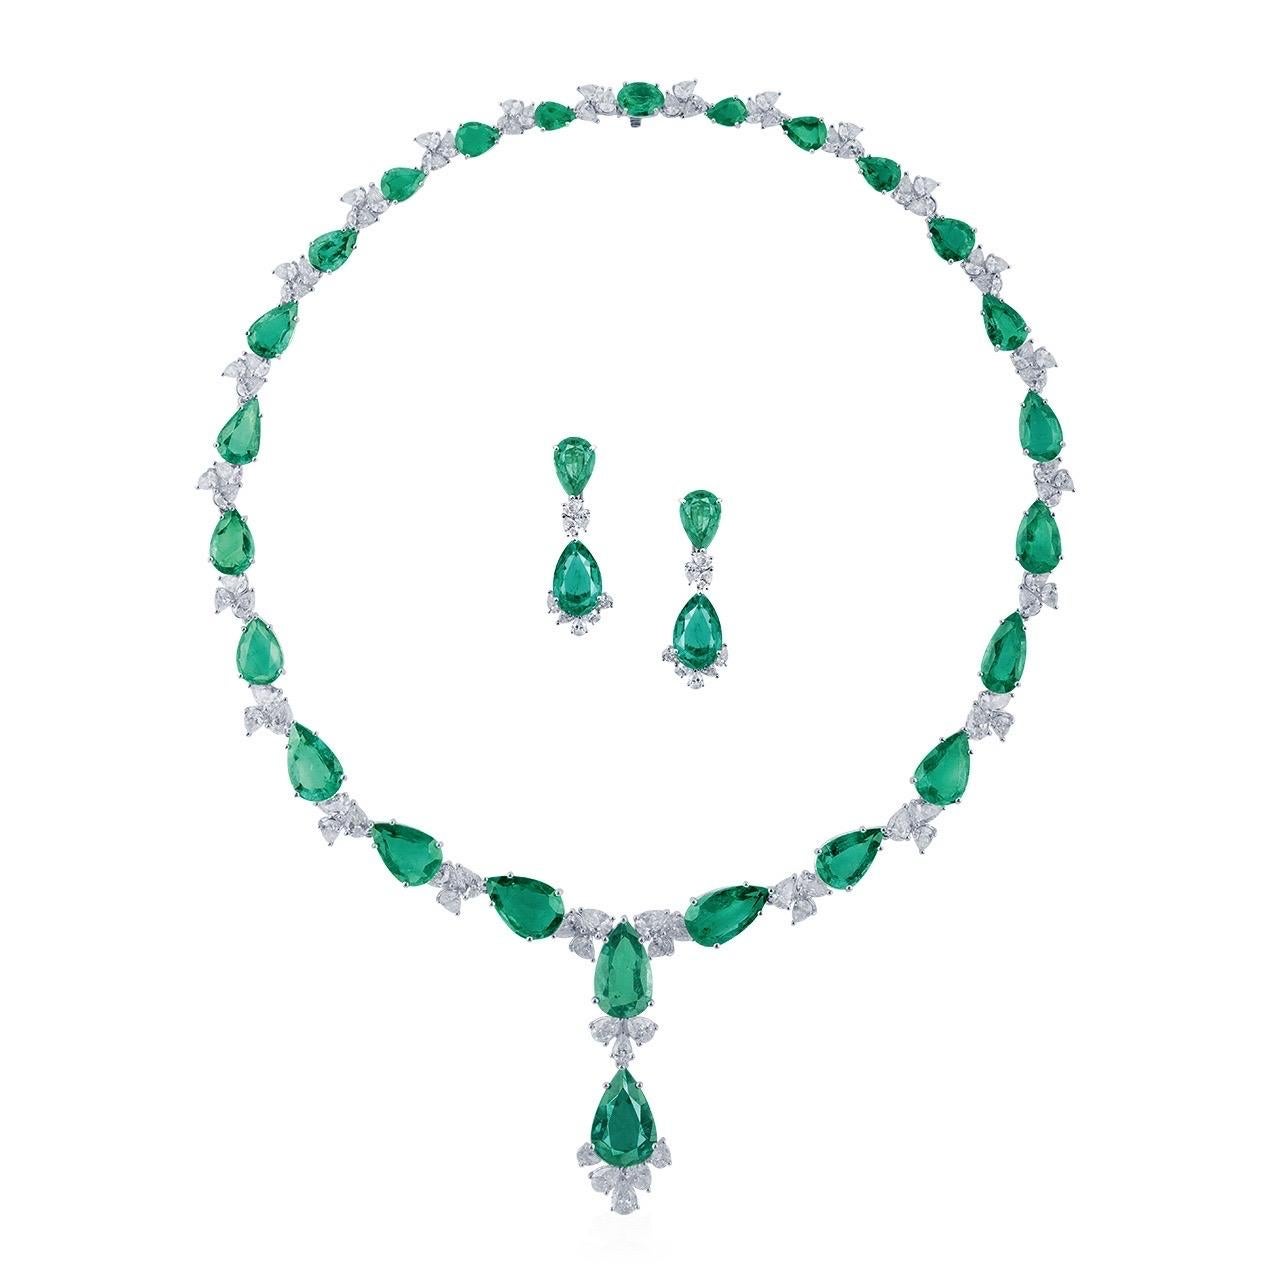 Featuring all natural untreated Zambian Emeralds. 
Main stone of the chain: 25 emeralds totaling approximately 65.07 carats
Main stone of earrings: 2 emeralds totaling approximately 15.40 carats, total finished product weight
setting: white diamonds